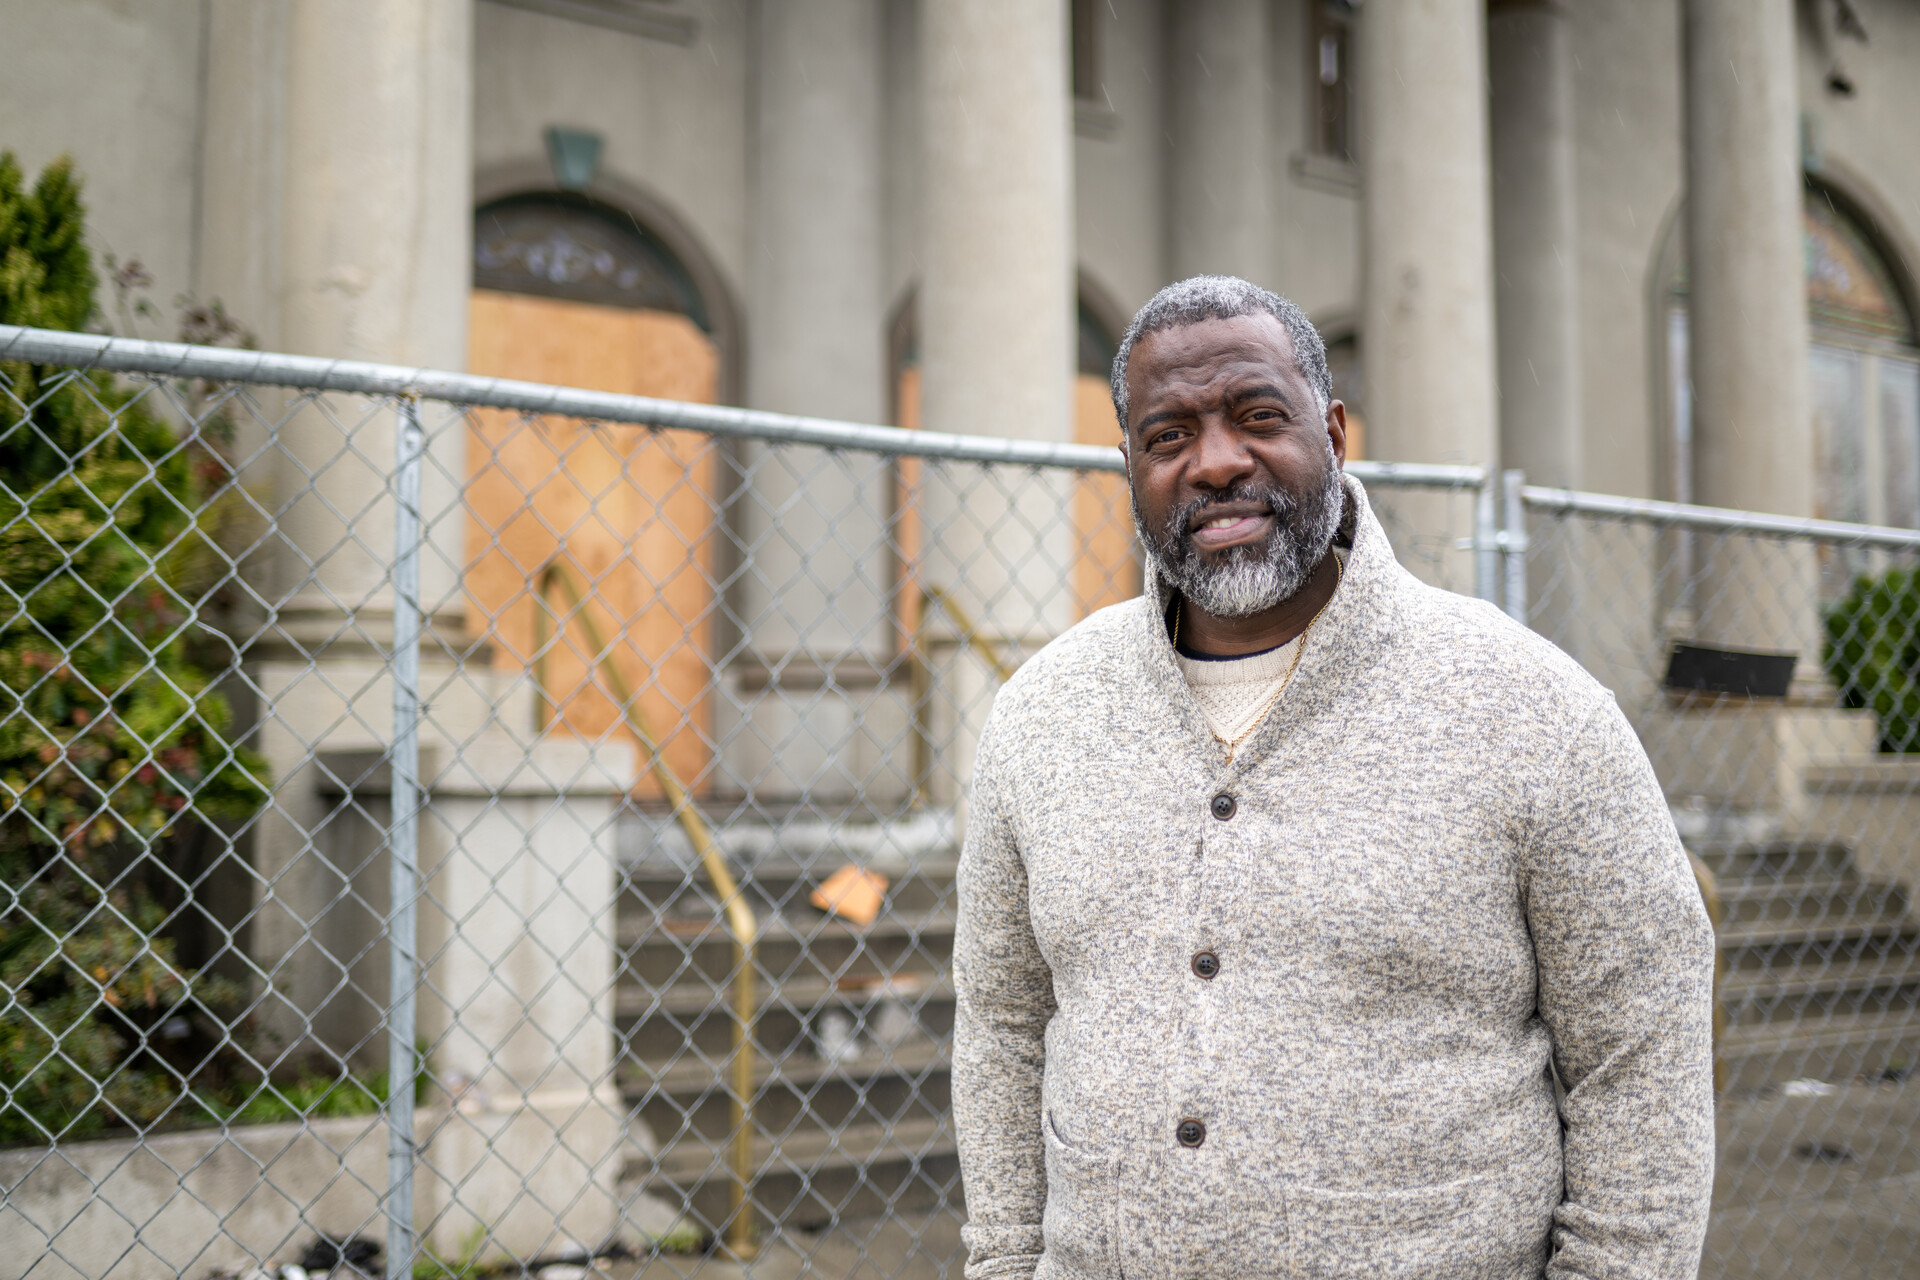 A Black man with salt-and-pepper hair and a full beard wearing a light grey cardigan stands outside a building with a fence behind him.